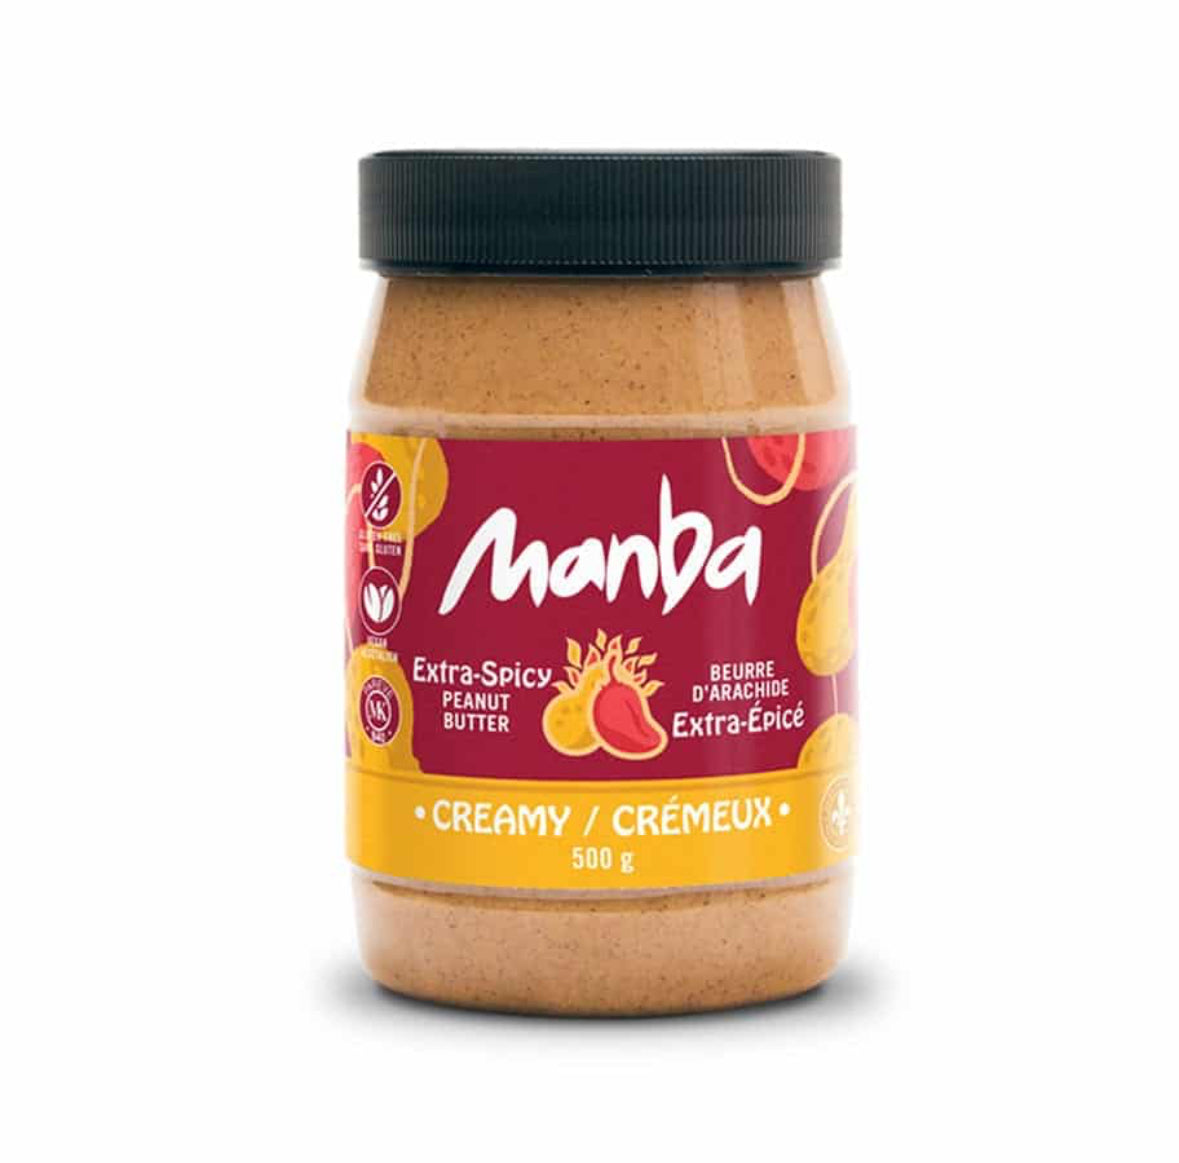 Manba Extra Spicy Peanut Butter